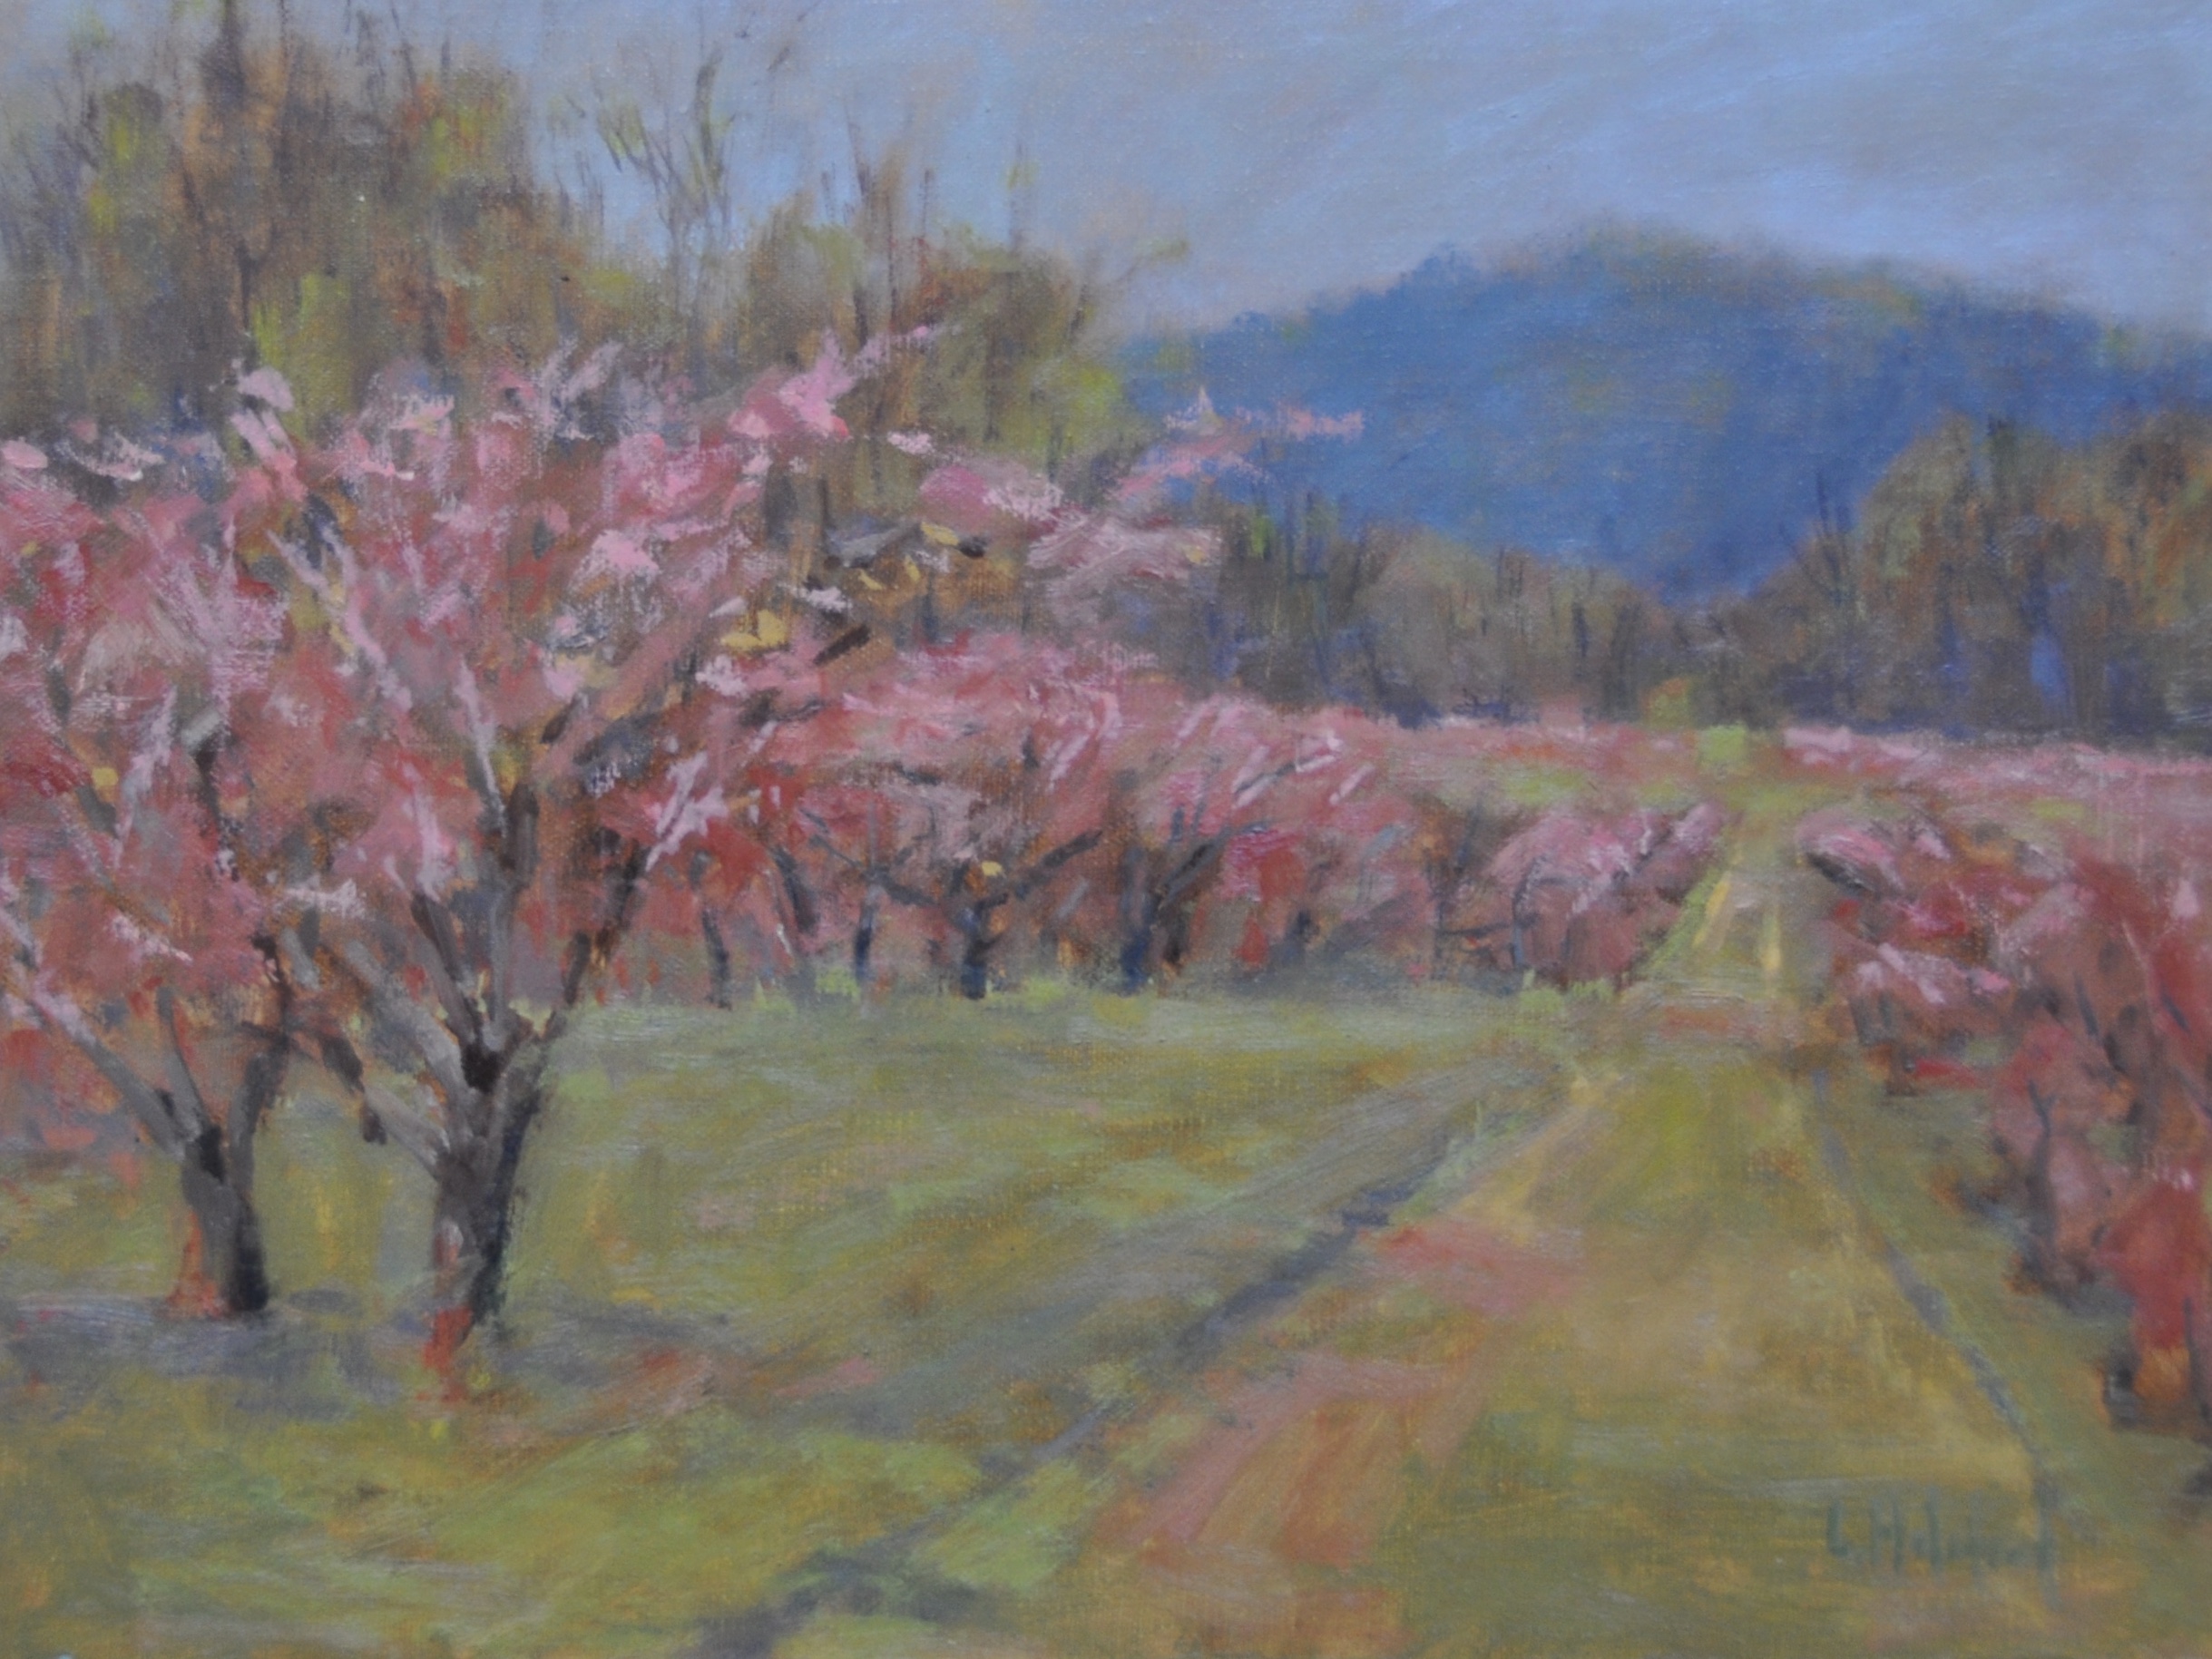 Orchard Pink, Oil on linen, 9 x 12